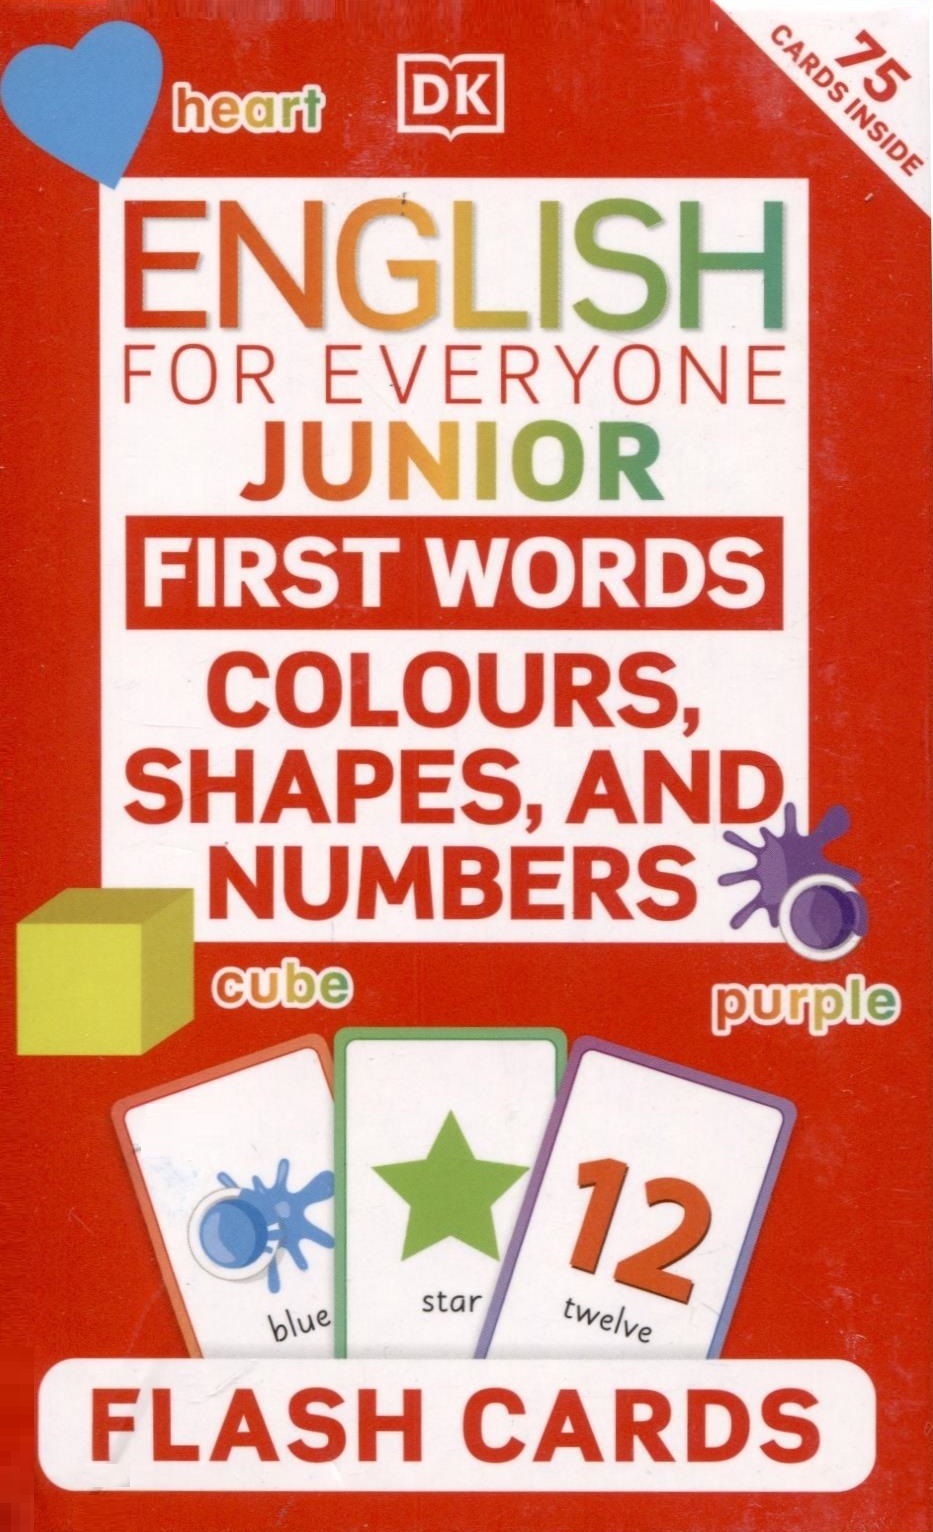 Junior First Words Colours, Shapes, and Numbers. Flash Cards